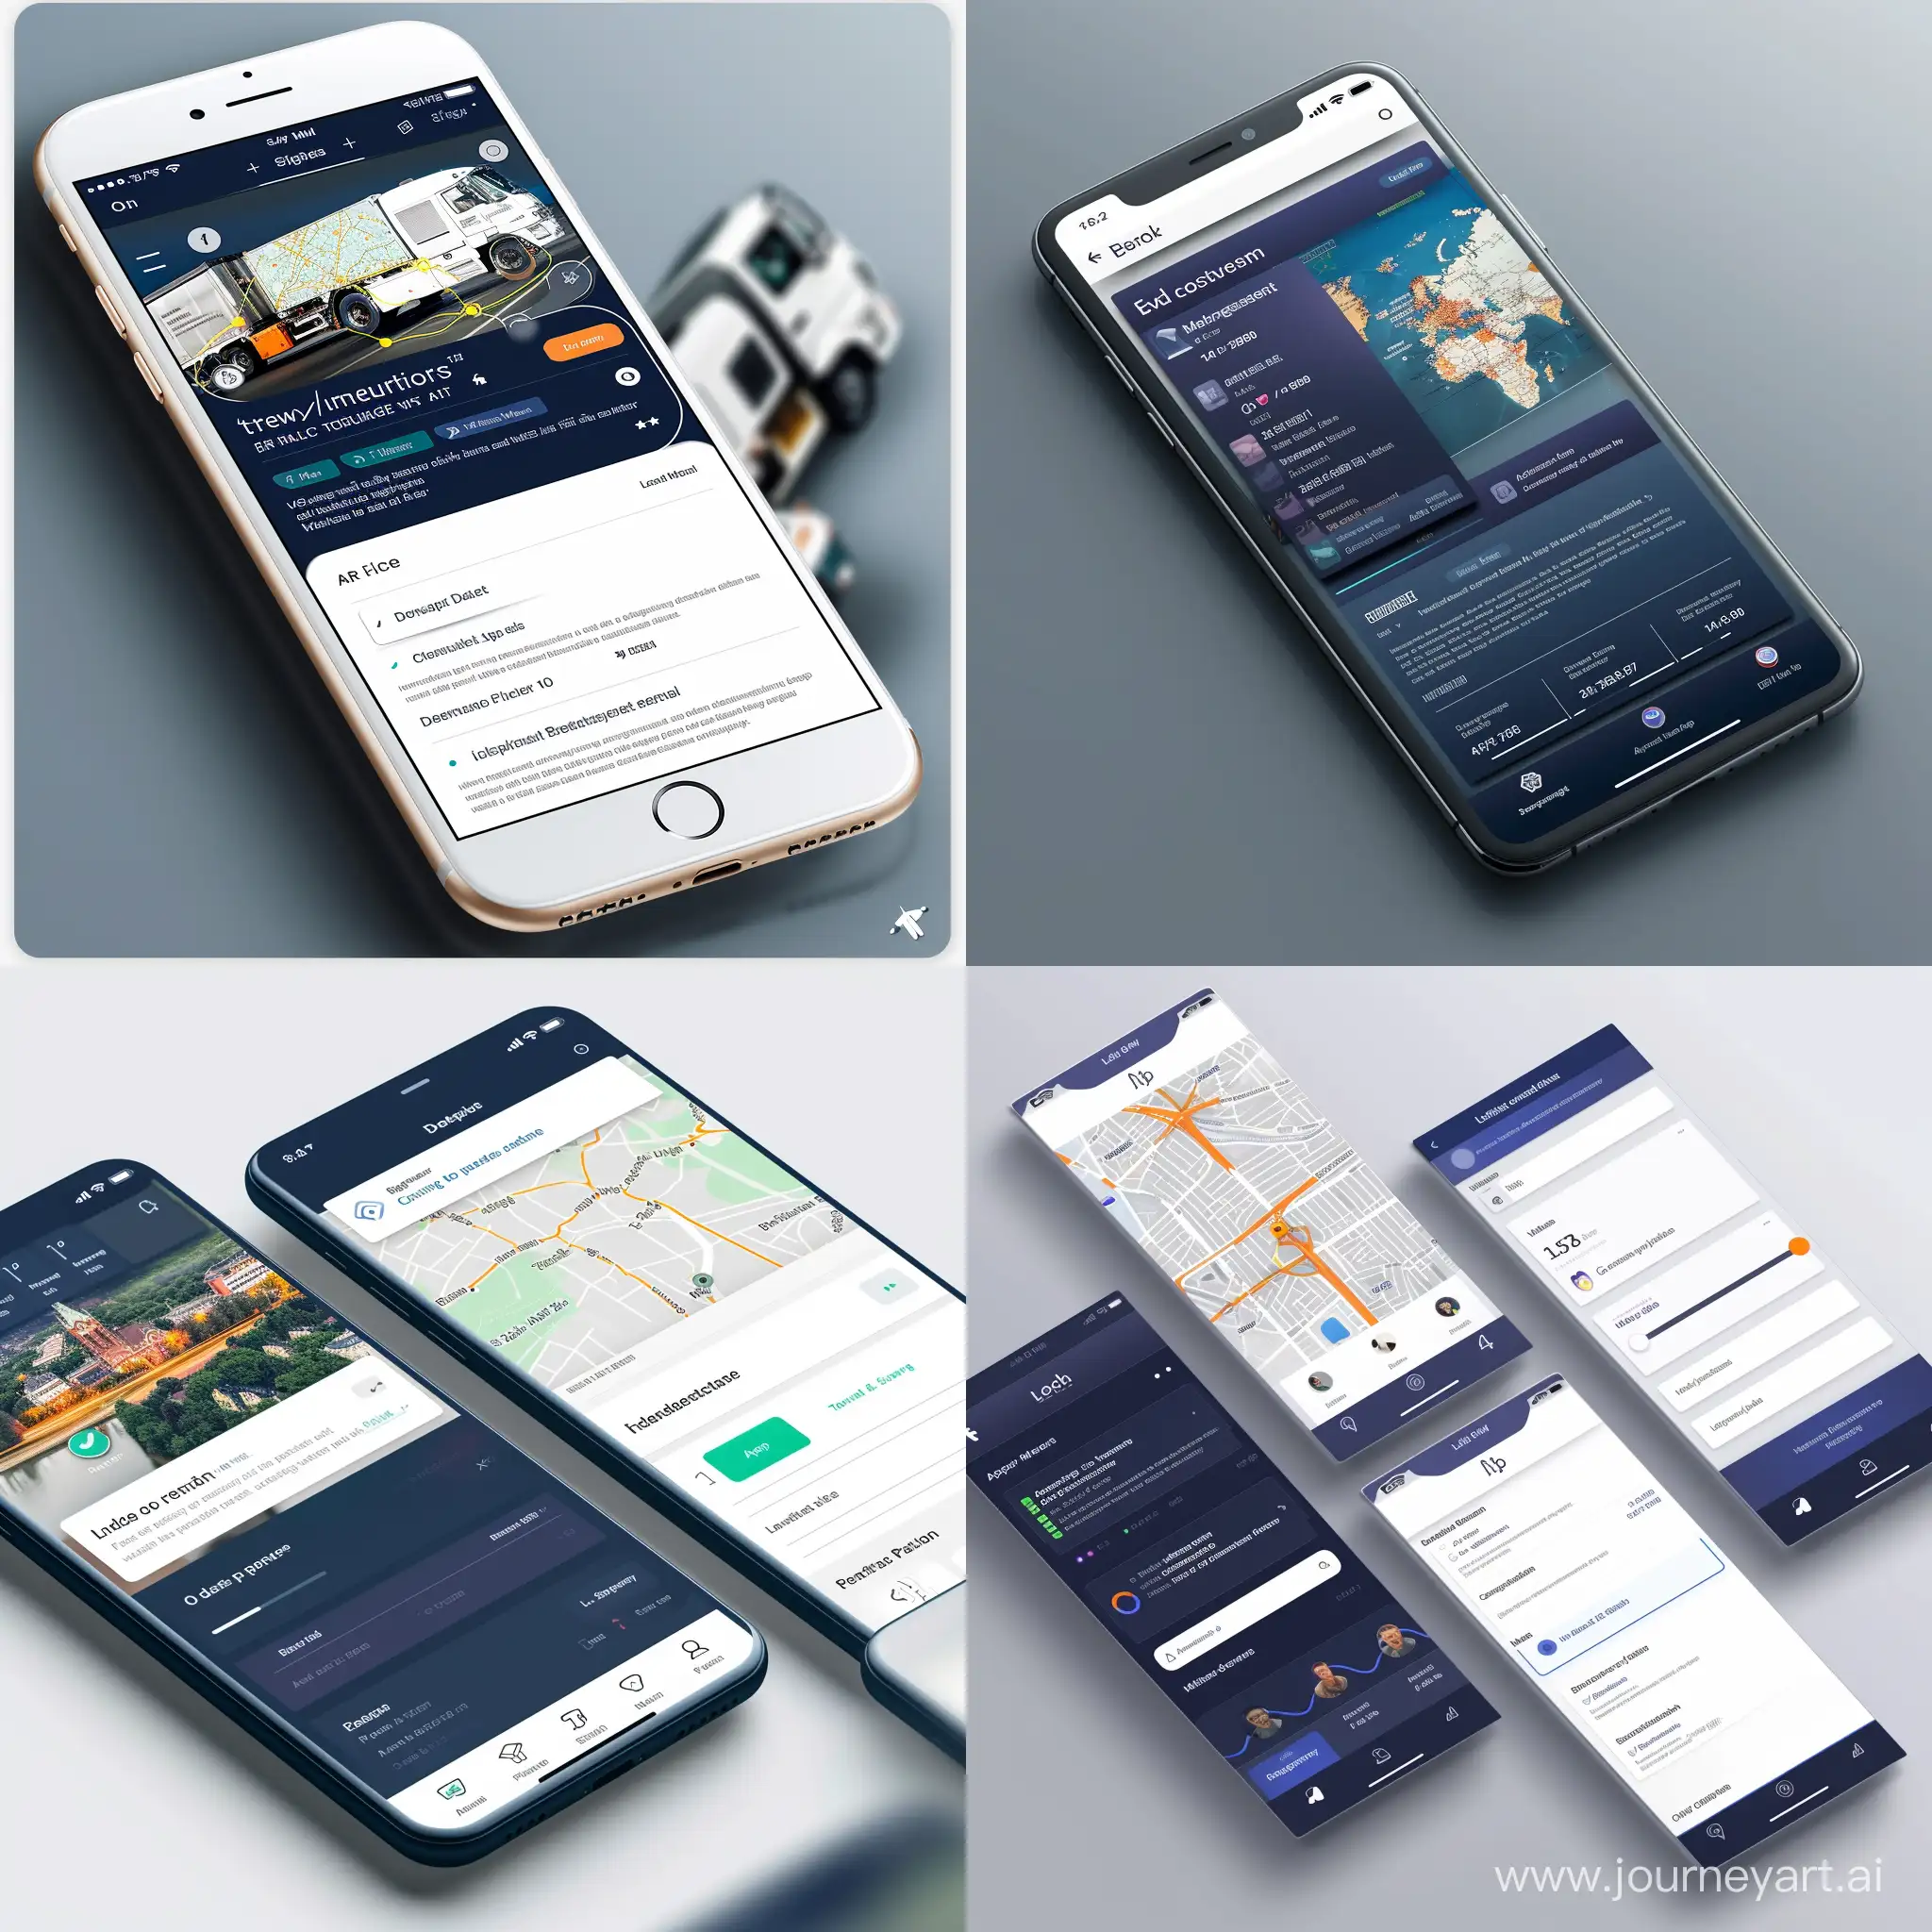 Realtime-Fleet-Tracking-Mobile-App-Login-Dashboard-Map-and-Form